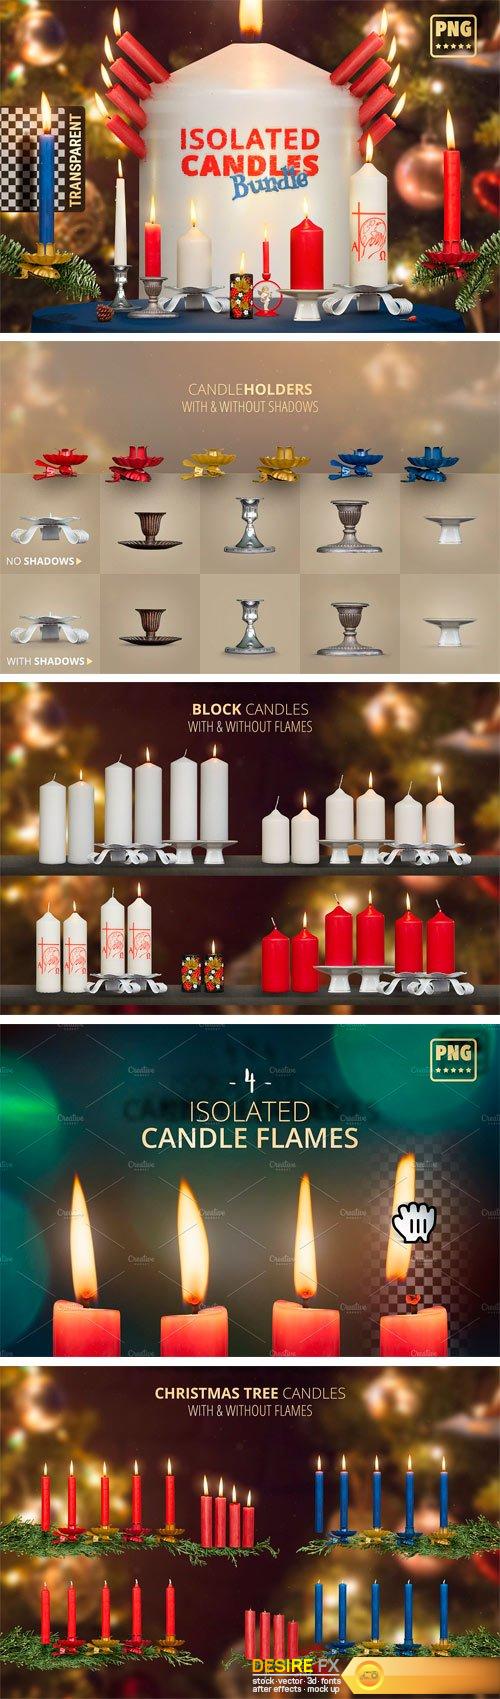 1510660654_isolated-candles-bundle-with-flames1